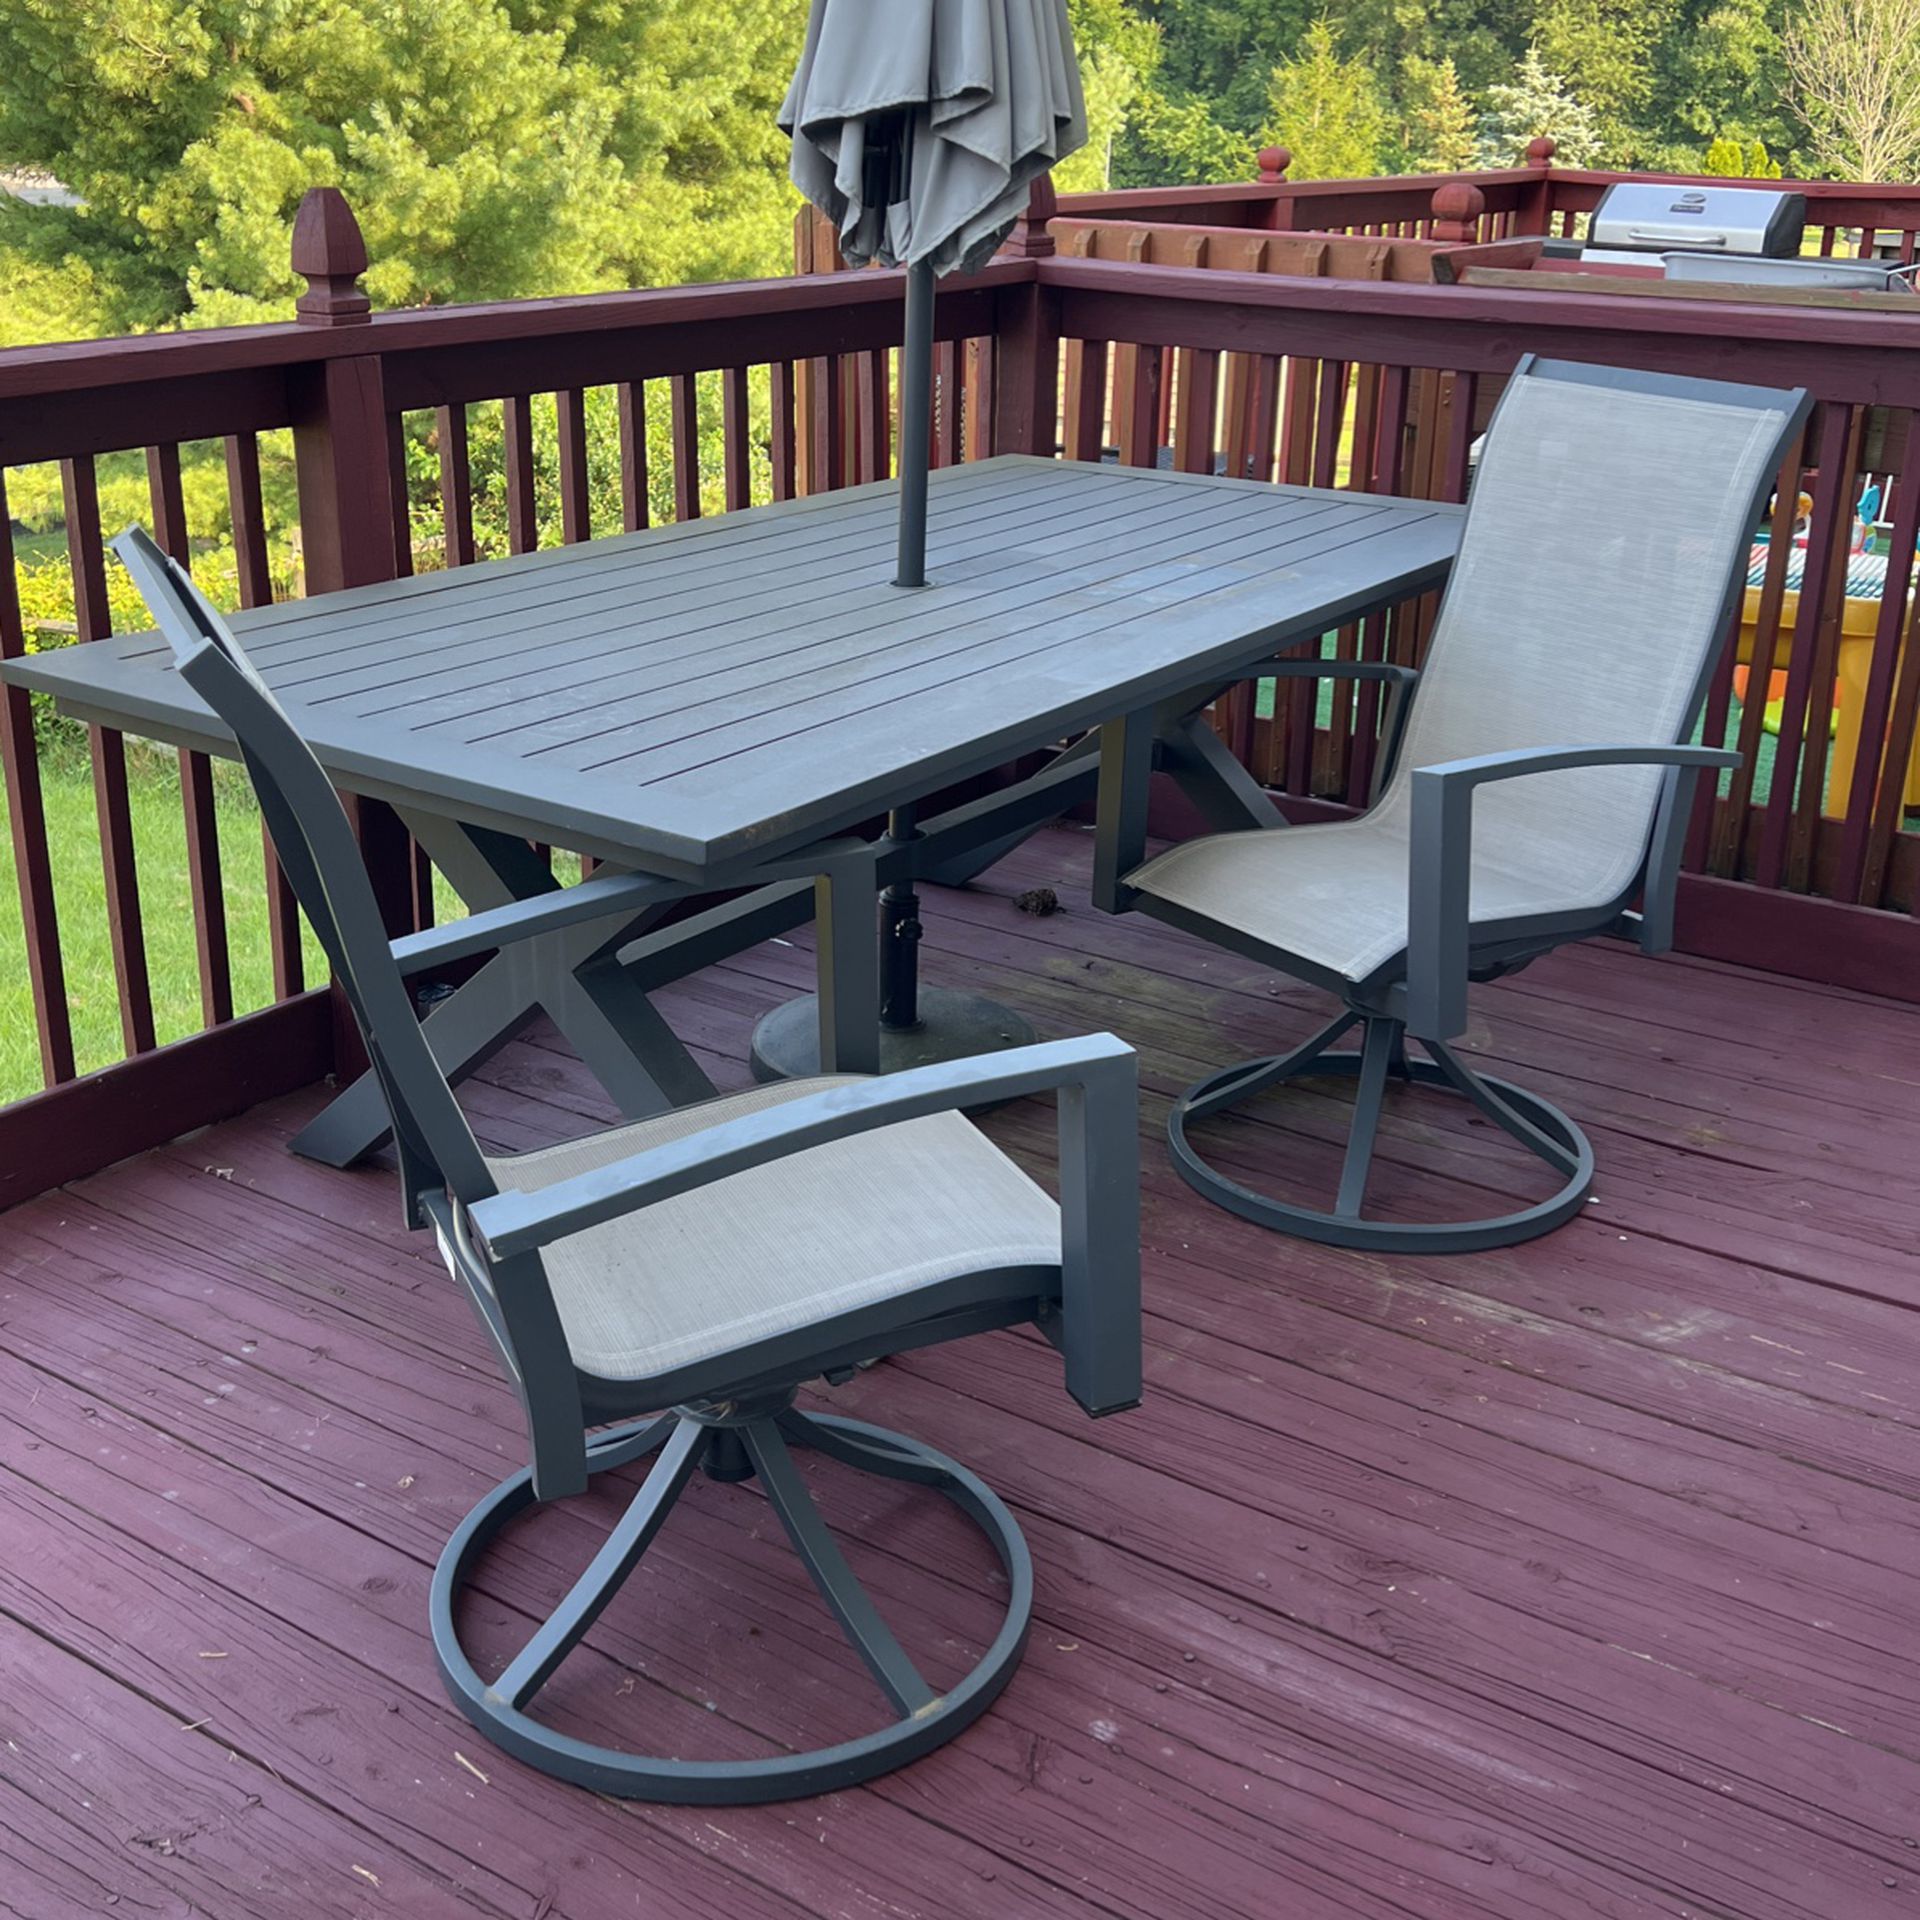 Outdoor Table Chairs X4 And Umbrella